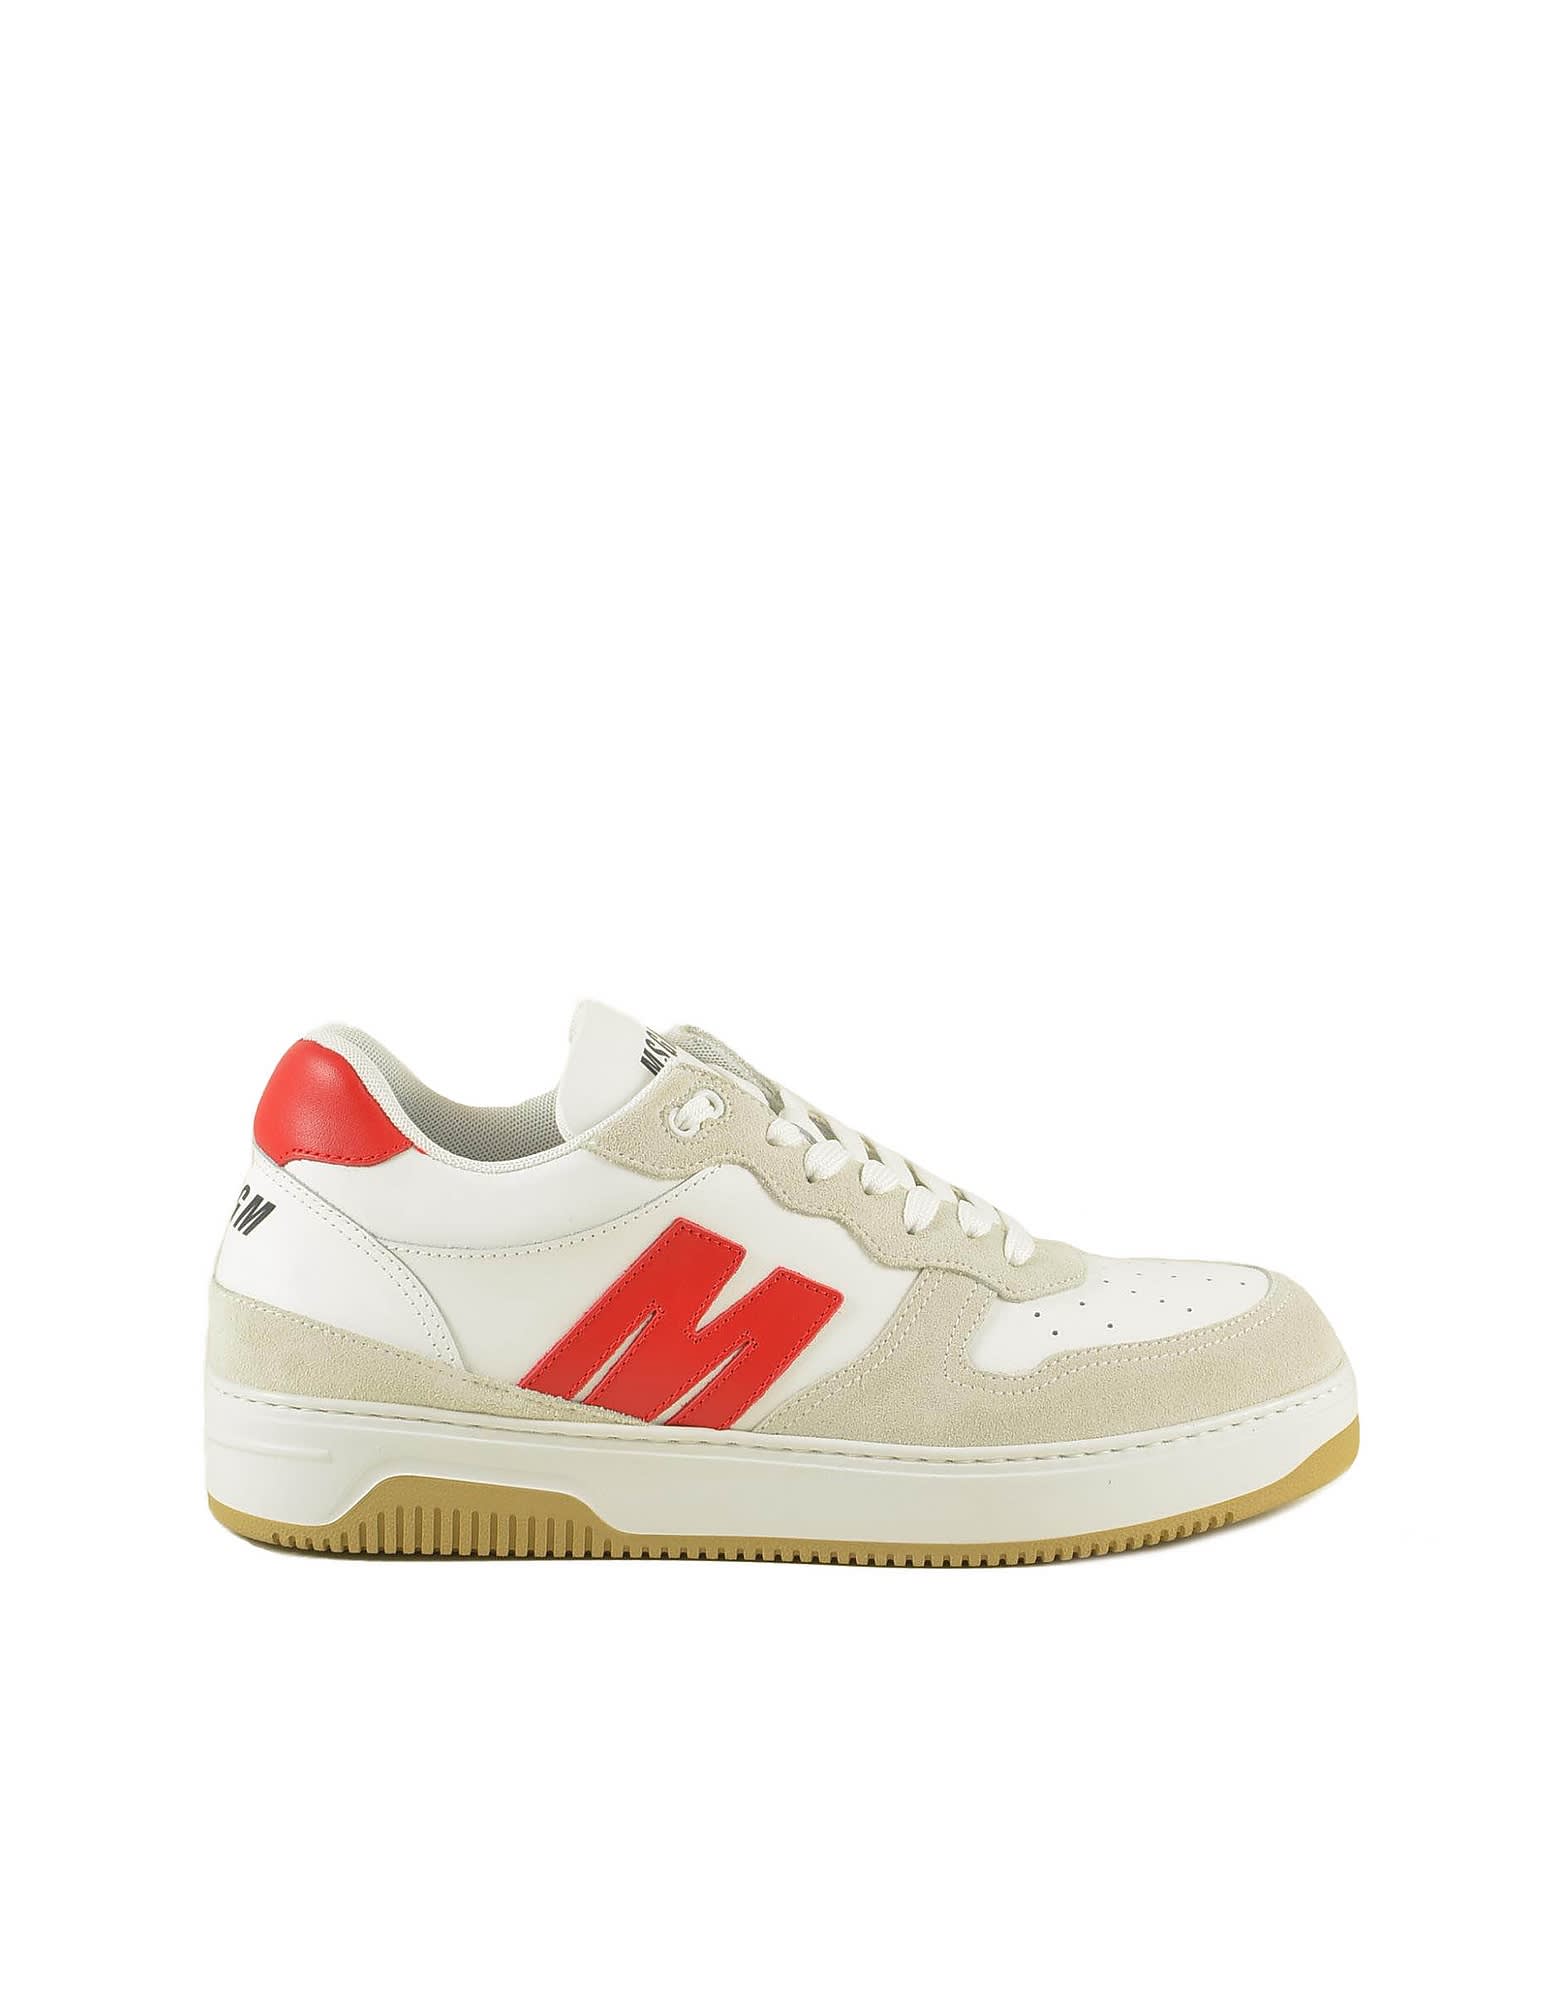 MSGM Mens White / Red Shoes